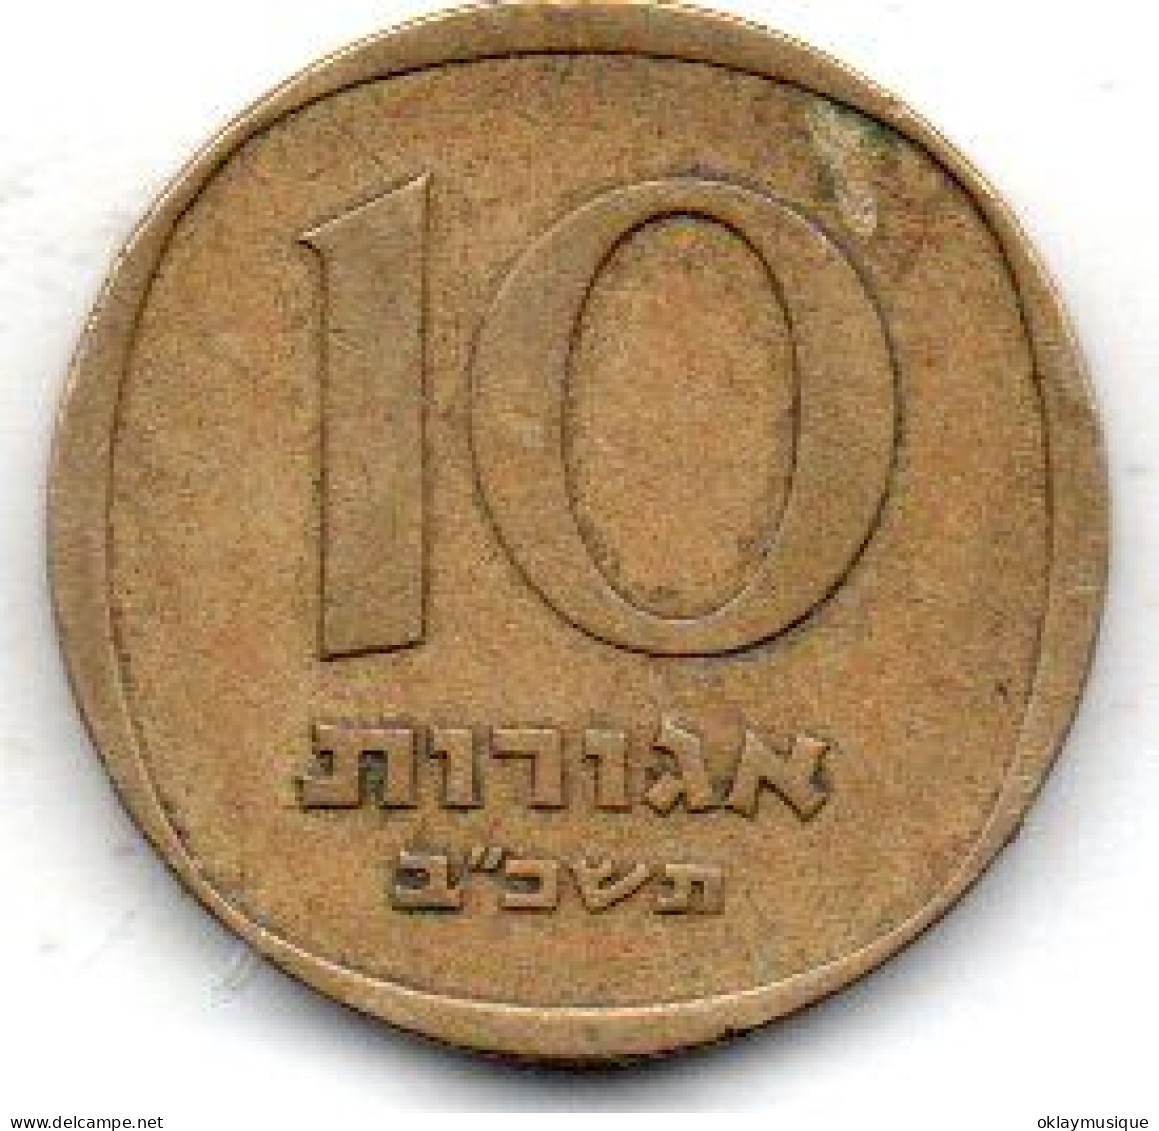 10 Agorot (with David's Star) 1971-72 - Israel